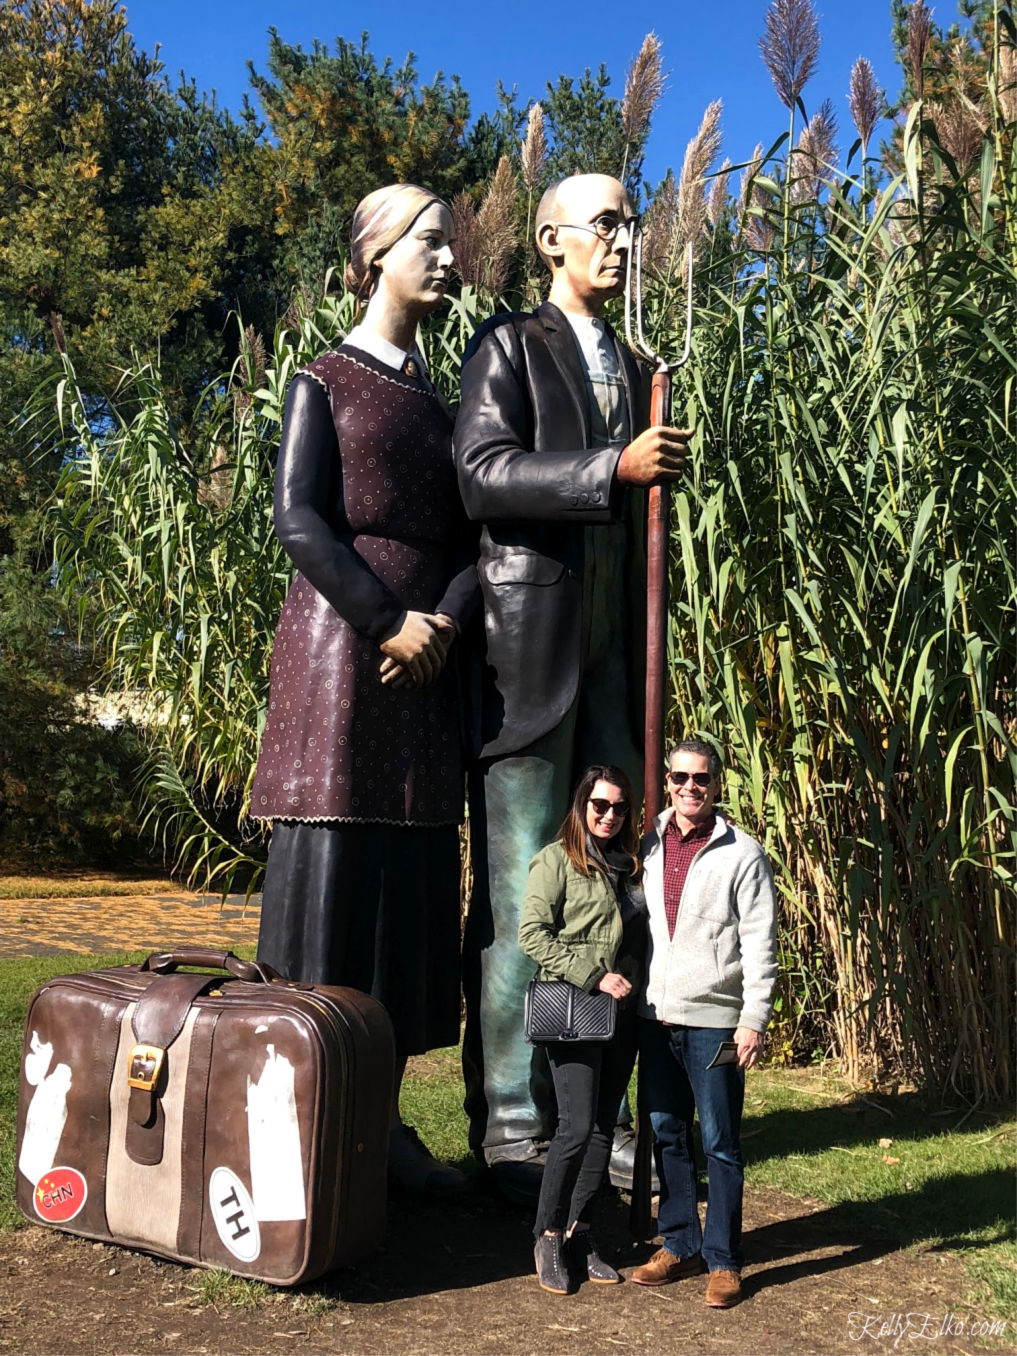 Grounds for Sculpture - how fun is this giant American Gothic sculpture. This park is a must see! kellyelko.com #sculpture #travel #njtravel #nj #art #kitsch #roadtrip #artlovers 